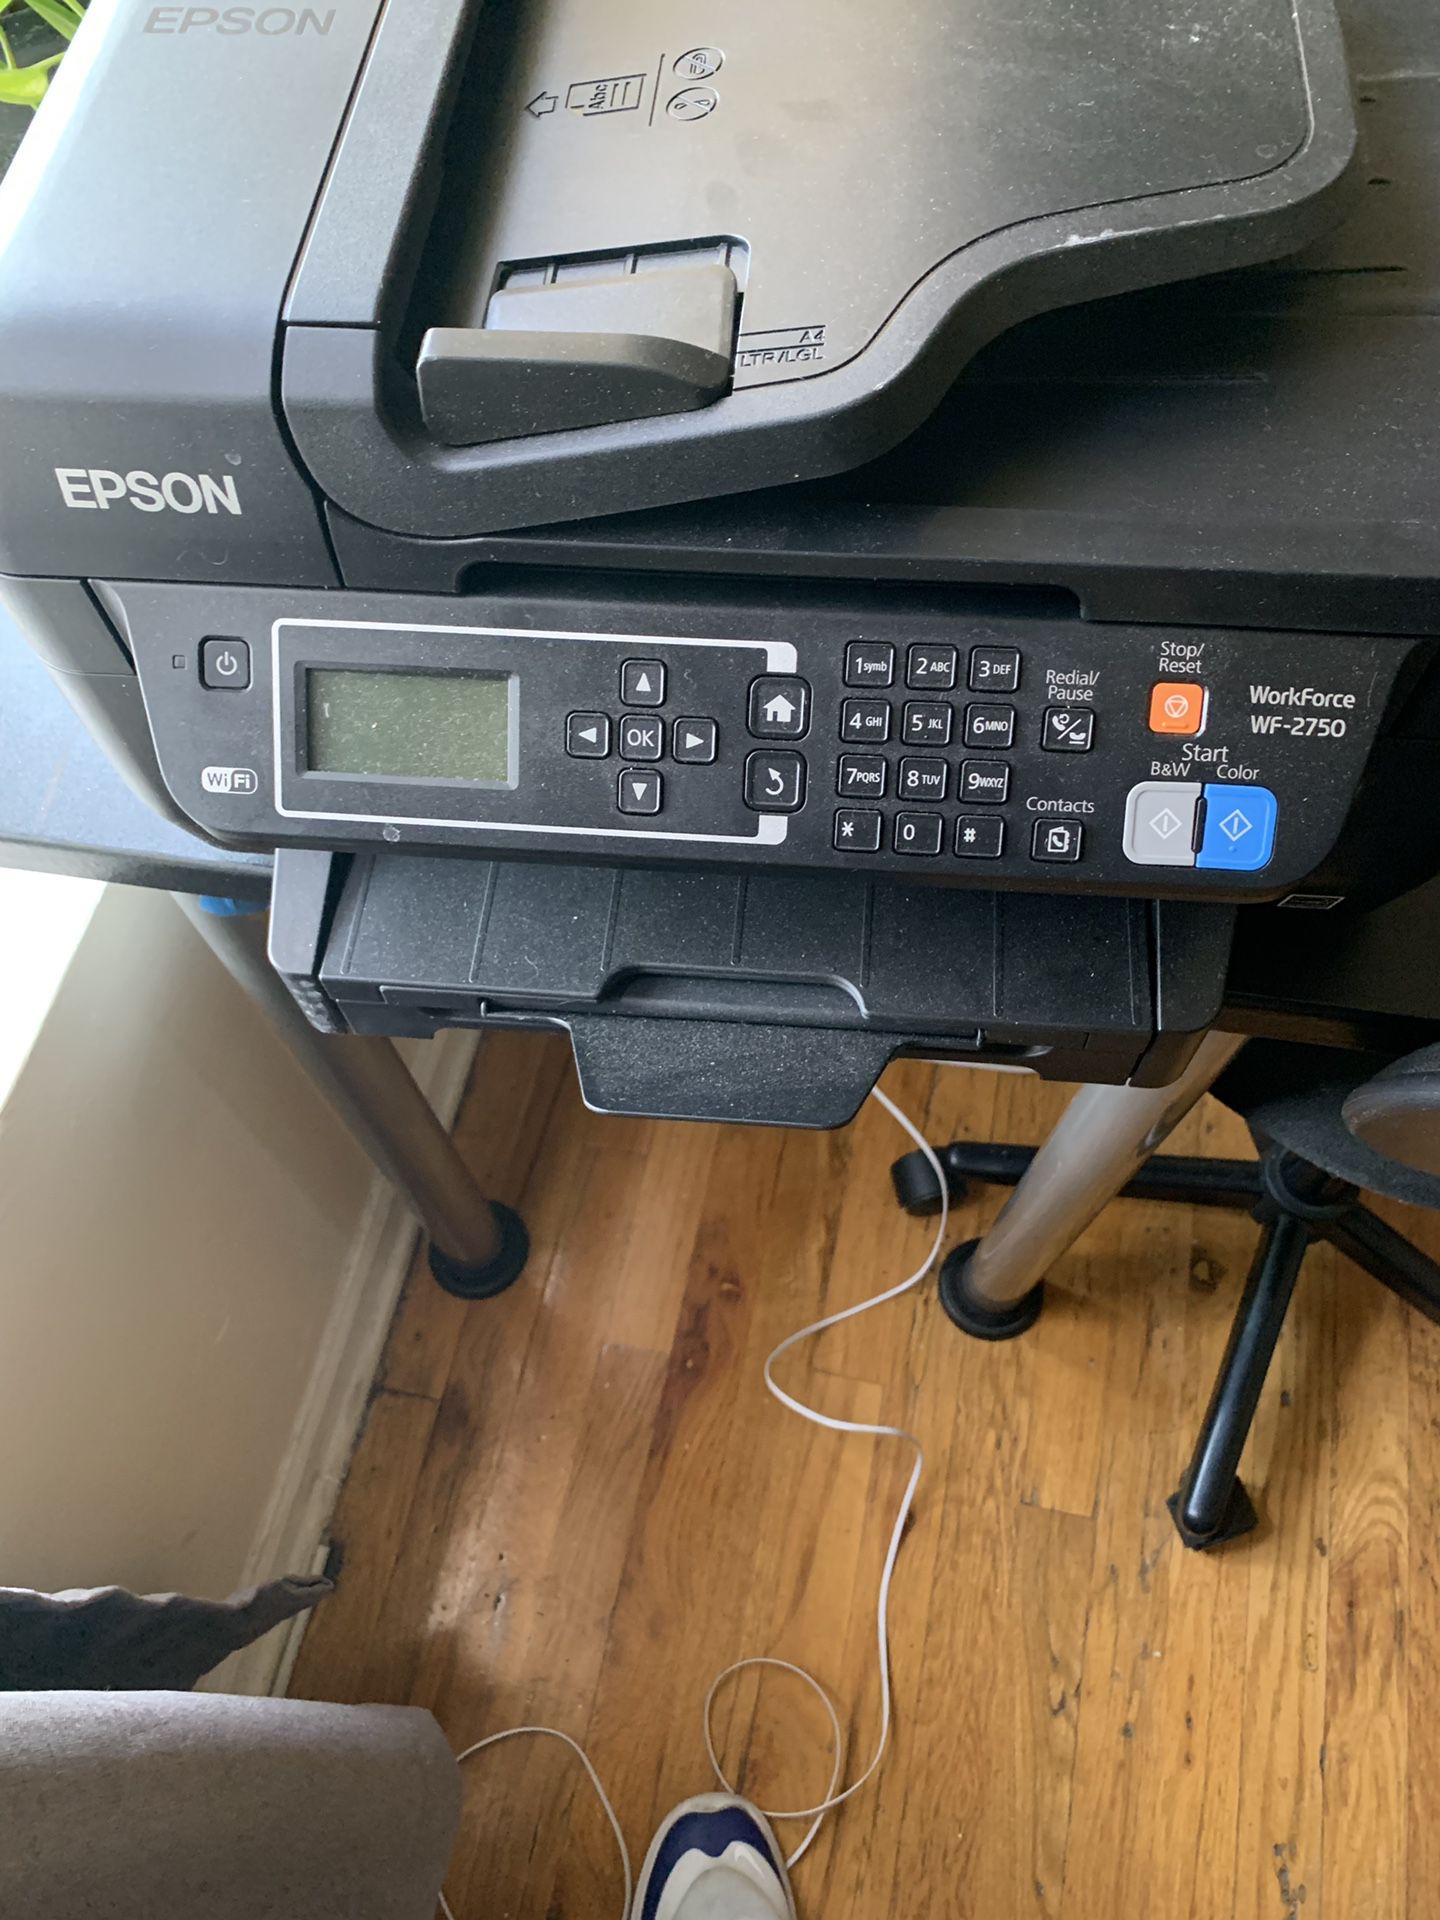 Eason all in one Bluetooth printer